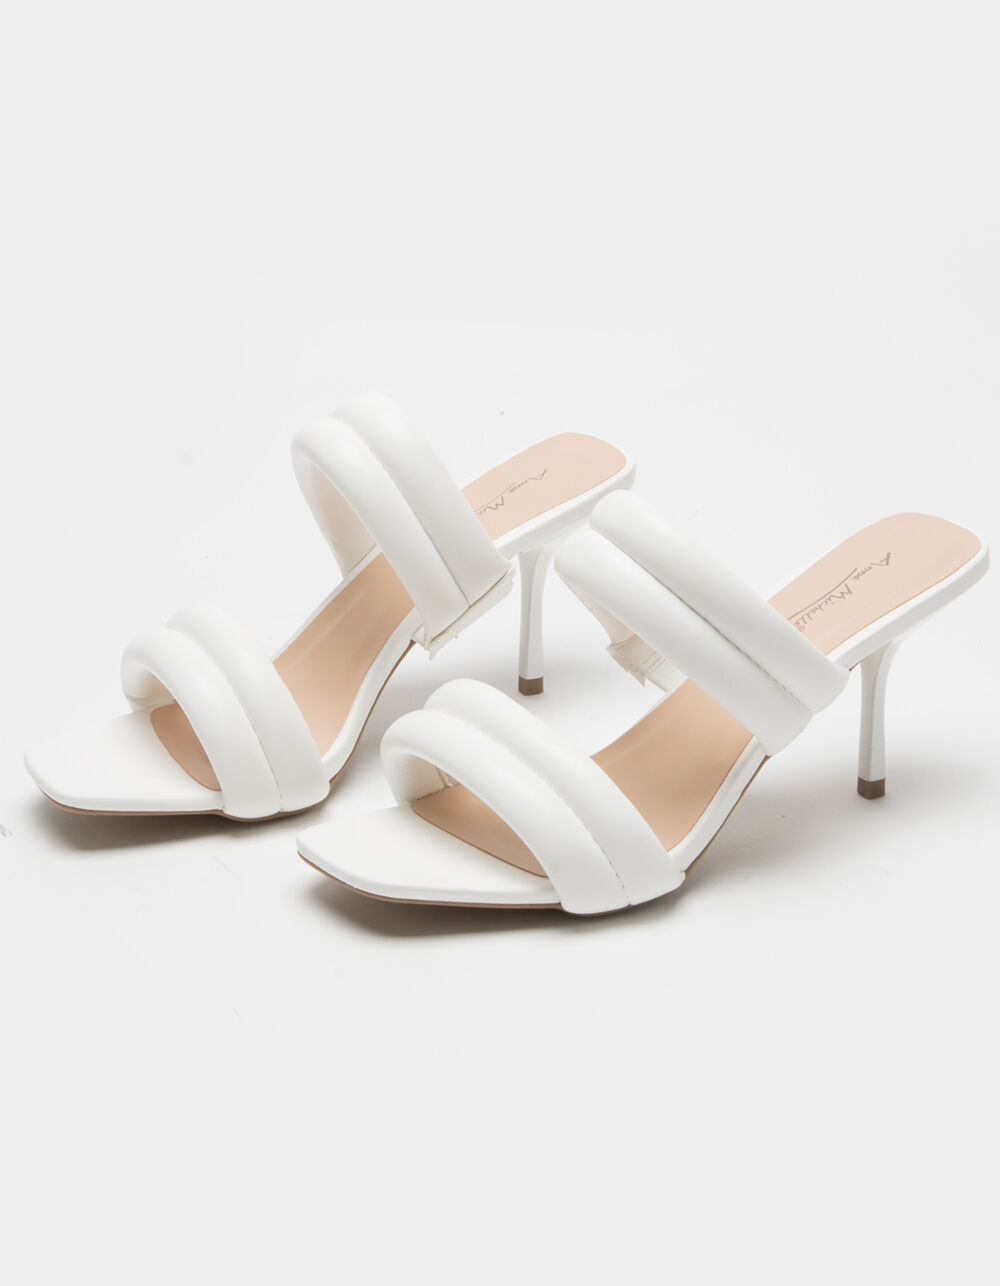 BAMBOO Quilted Mule Kitten Heels - WHITE | Tillys